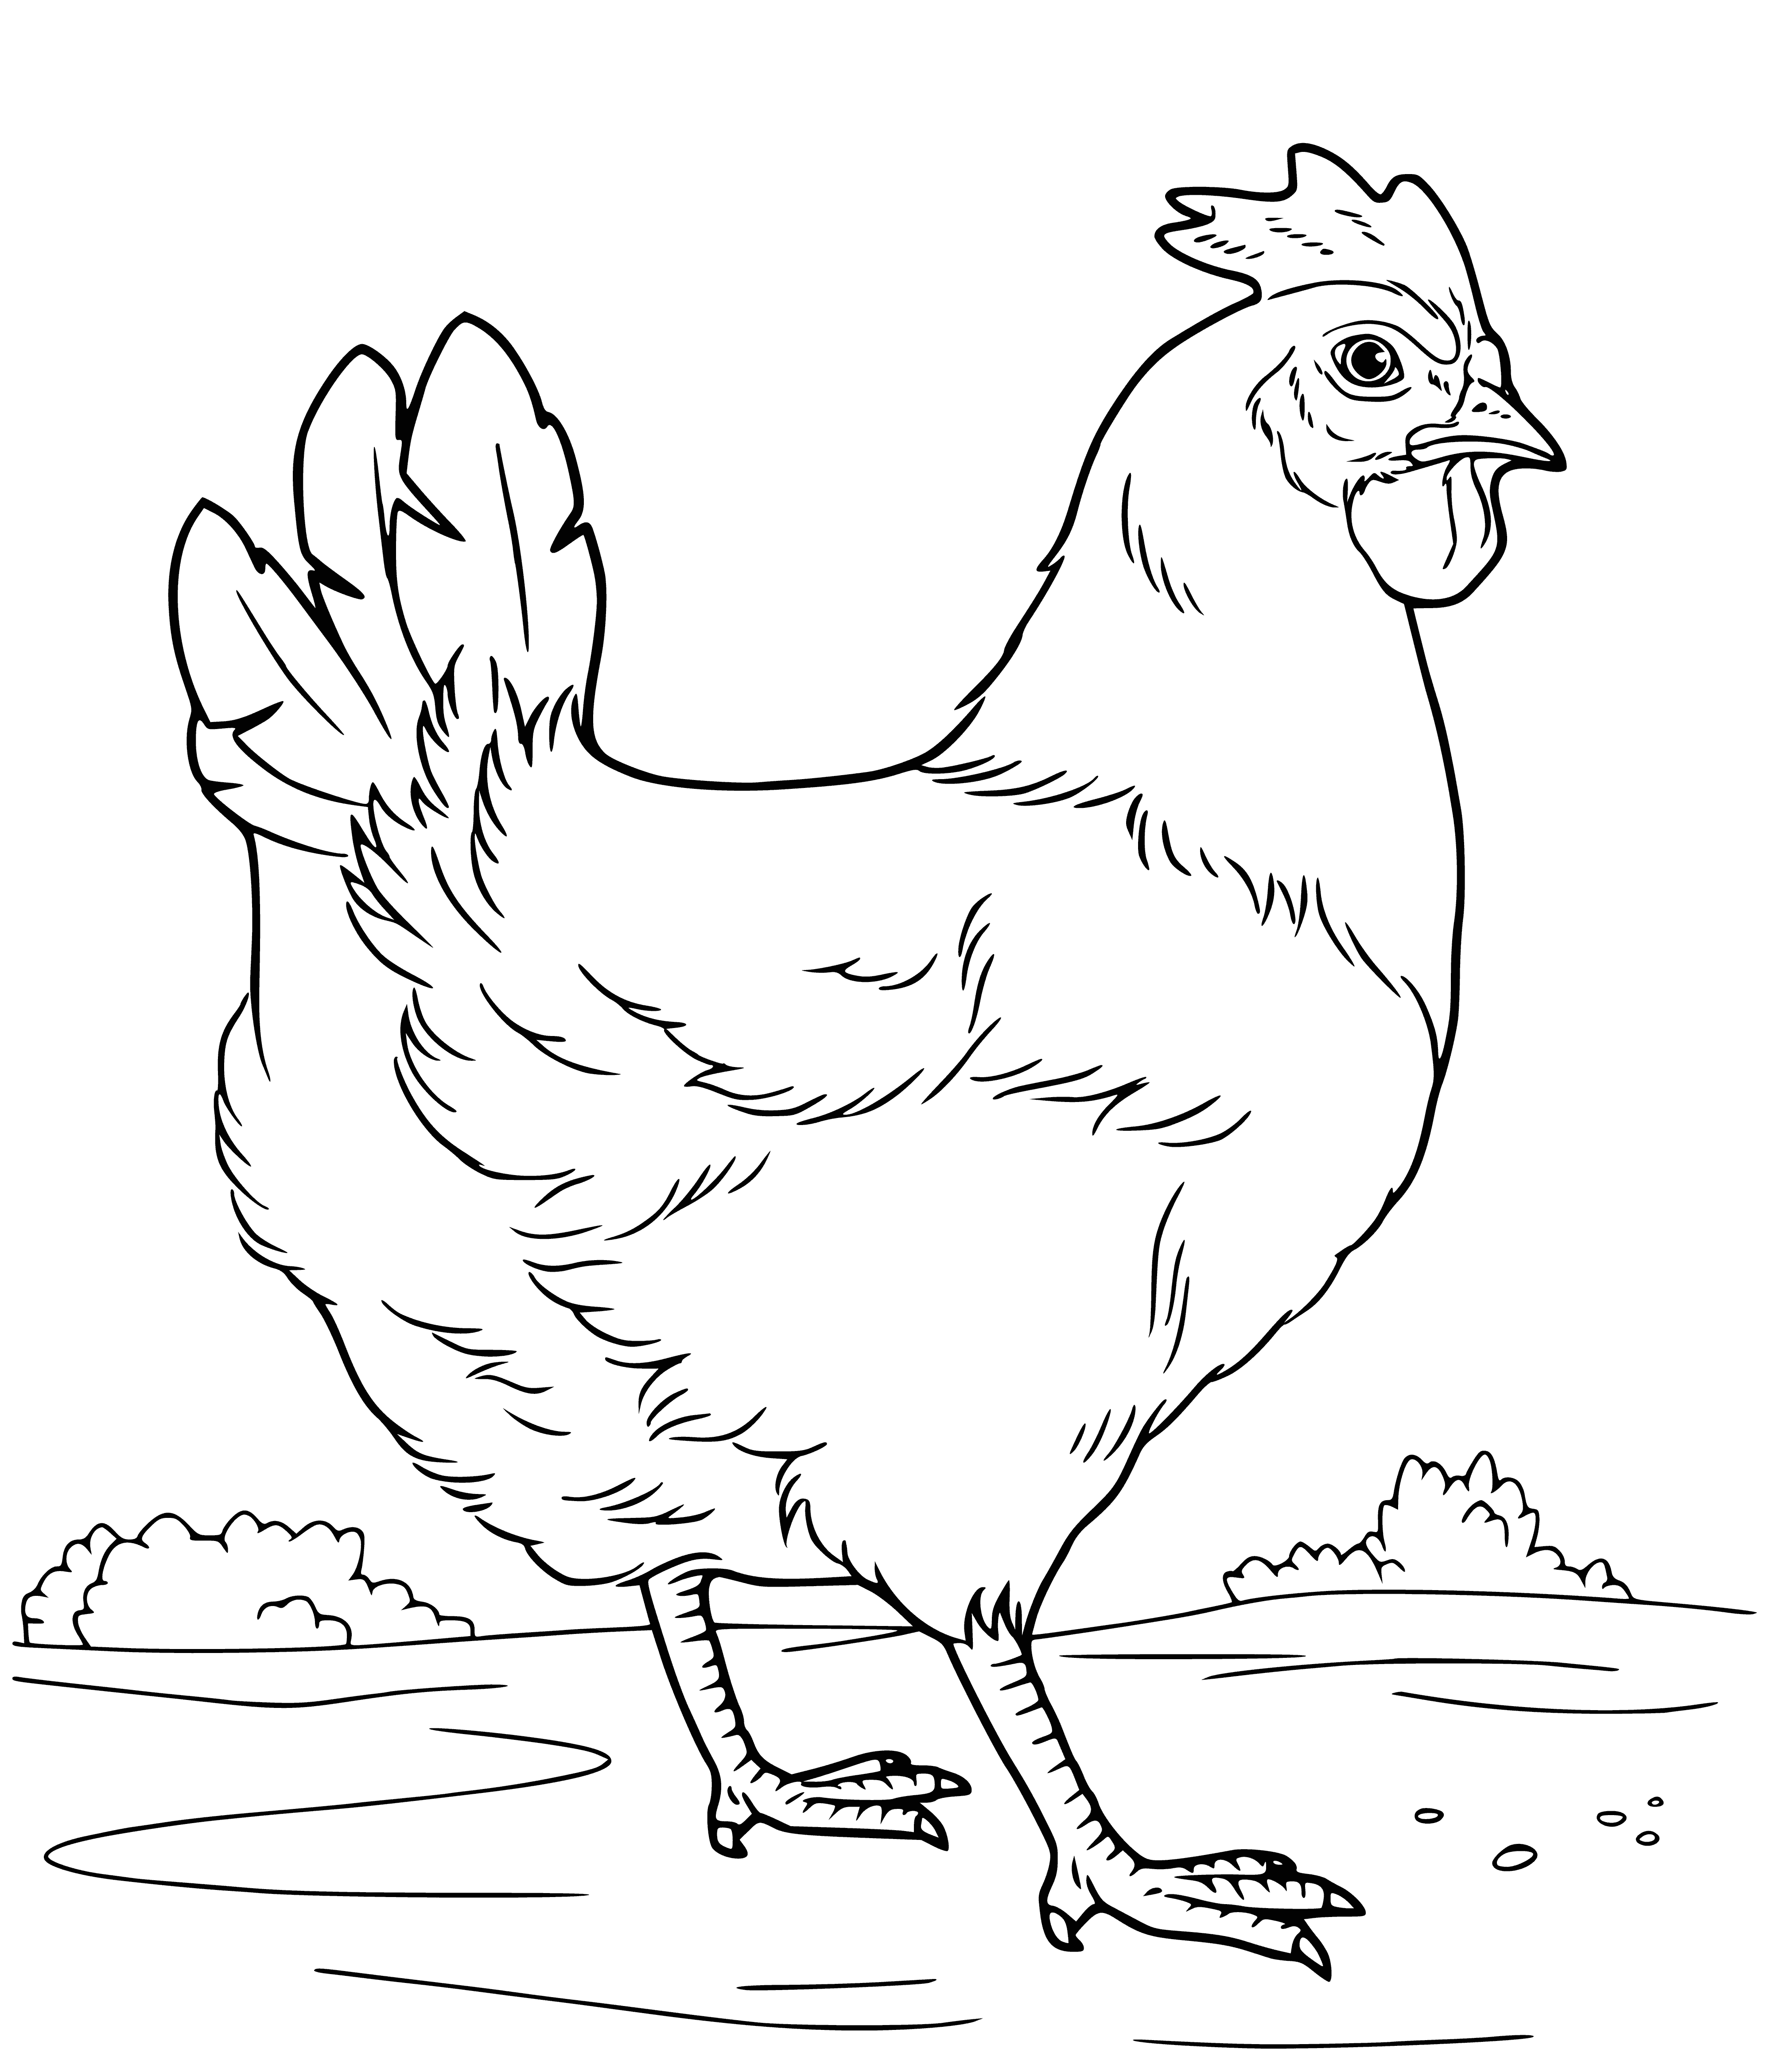 coloring page: Domesticated hen kept for eggs/meat. About 20in, reddish-brown feathers. Makes clucking noise, can lay up to 150 eggs/yr.